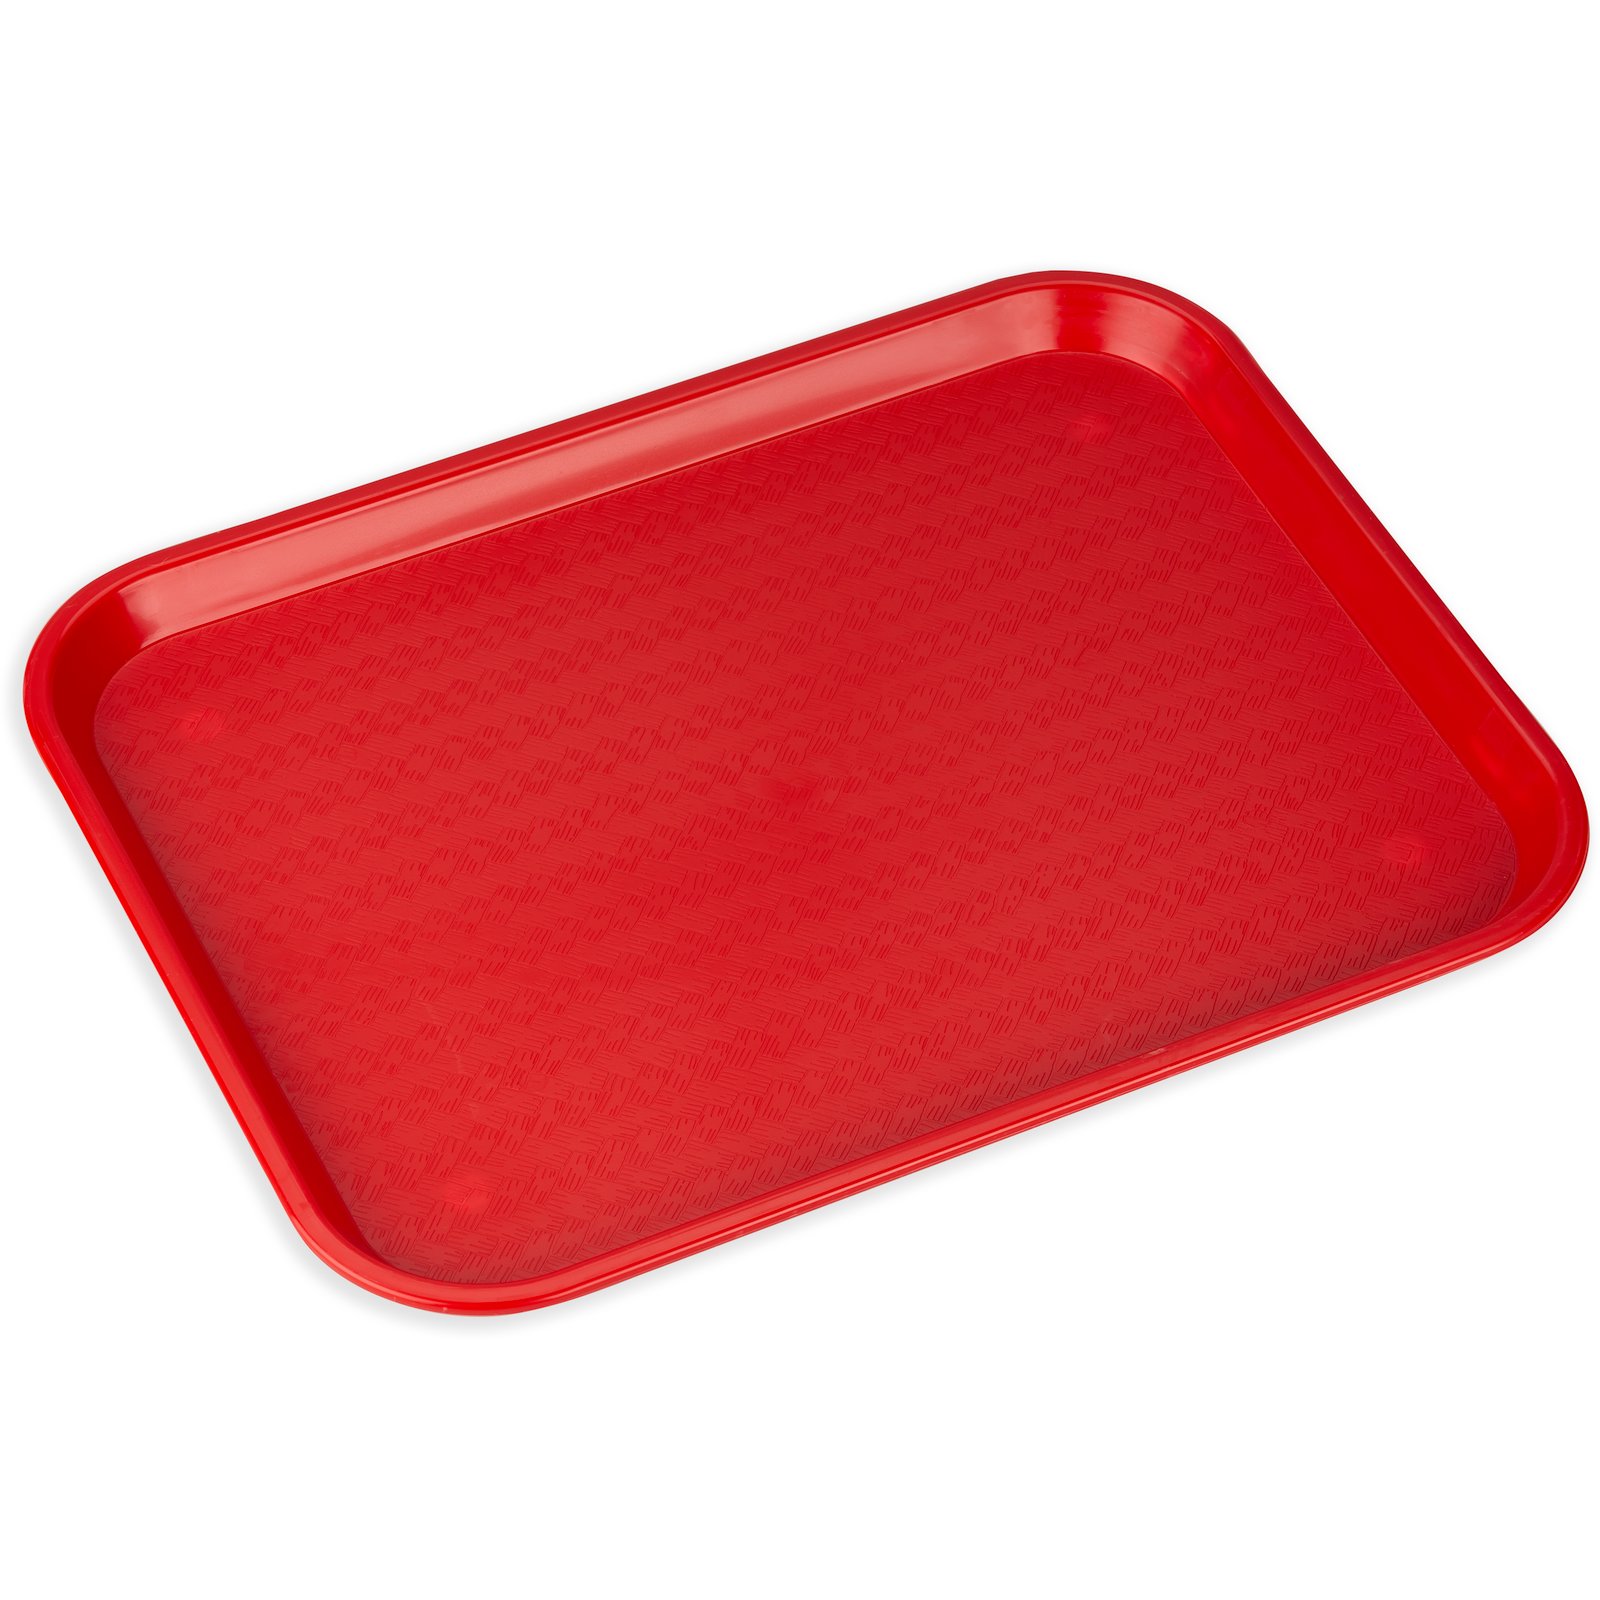 FAST FOOD TRAY 14X18 RED - Big Plate Restaurant Supply